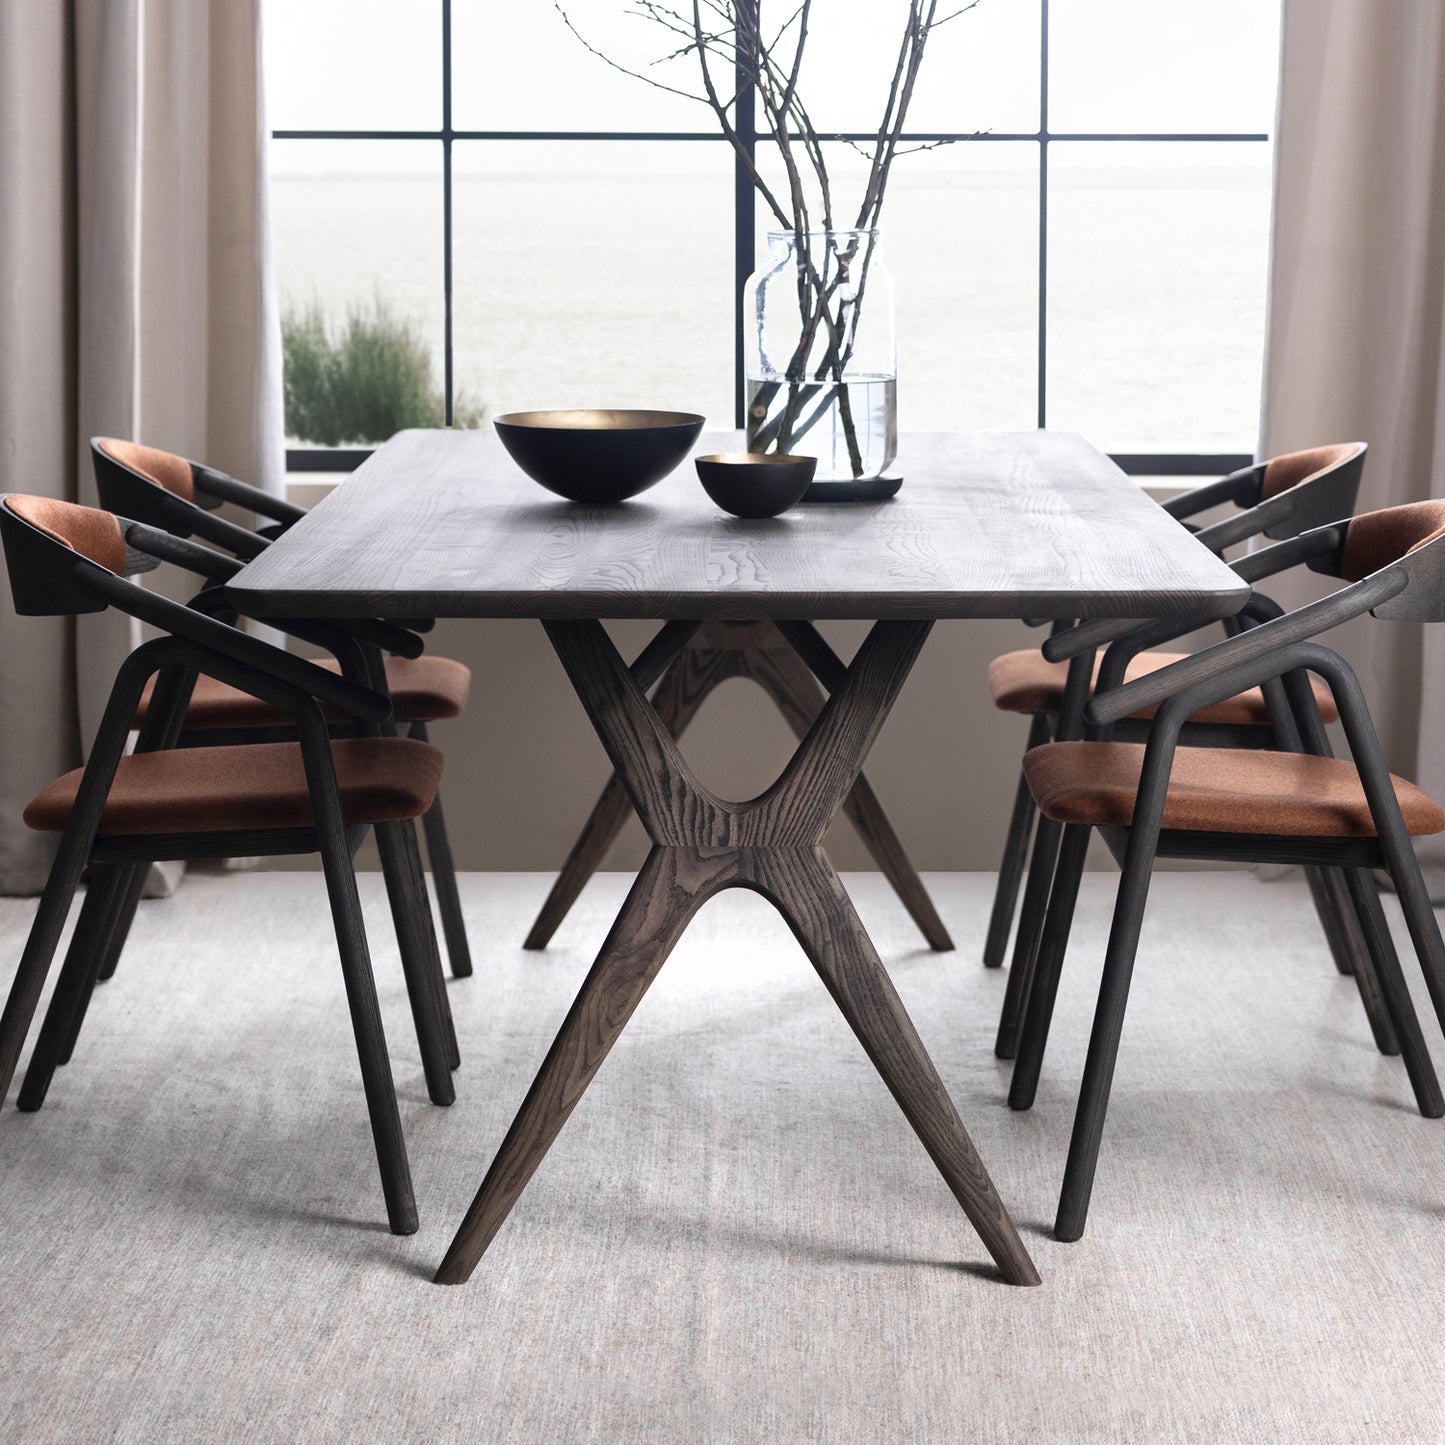 Rose Hill Ash Dining Table With Rounded Corners With Brass - 240cm Extending